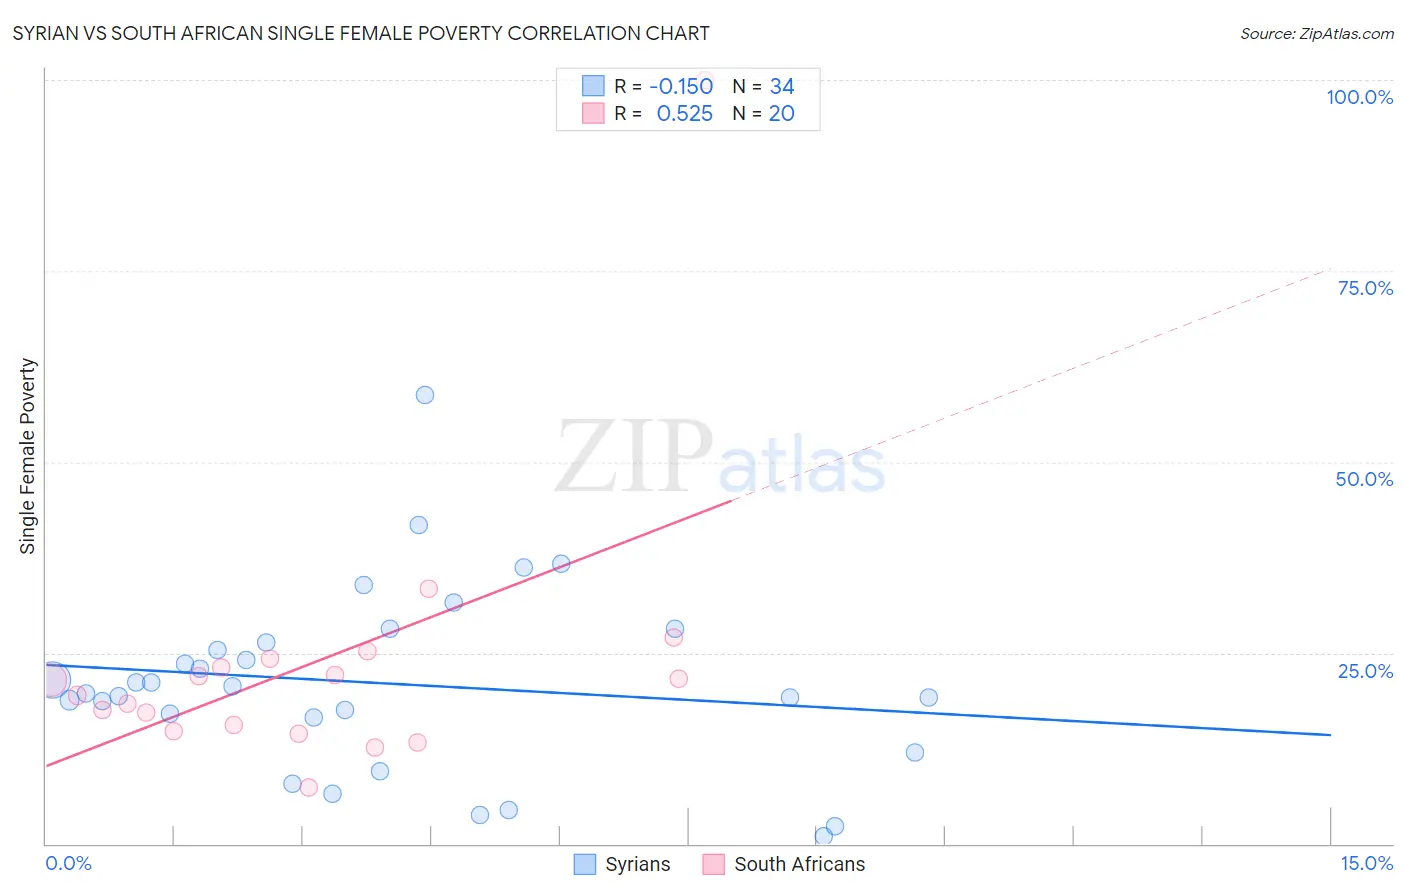 Syrian vs South African Single Female Poverty